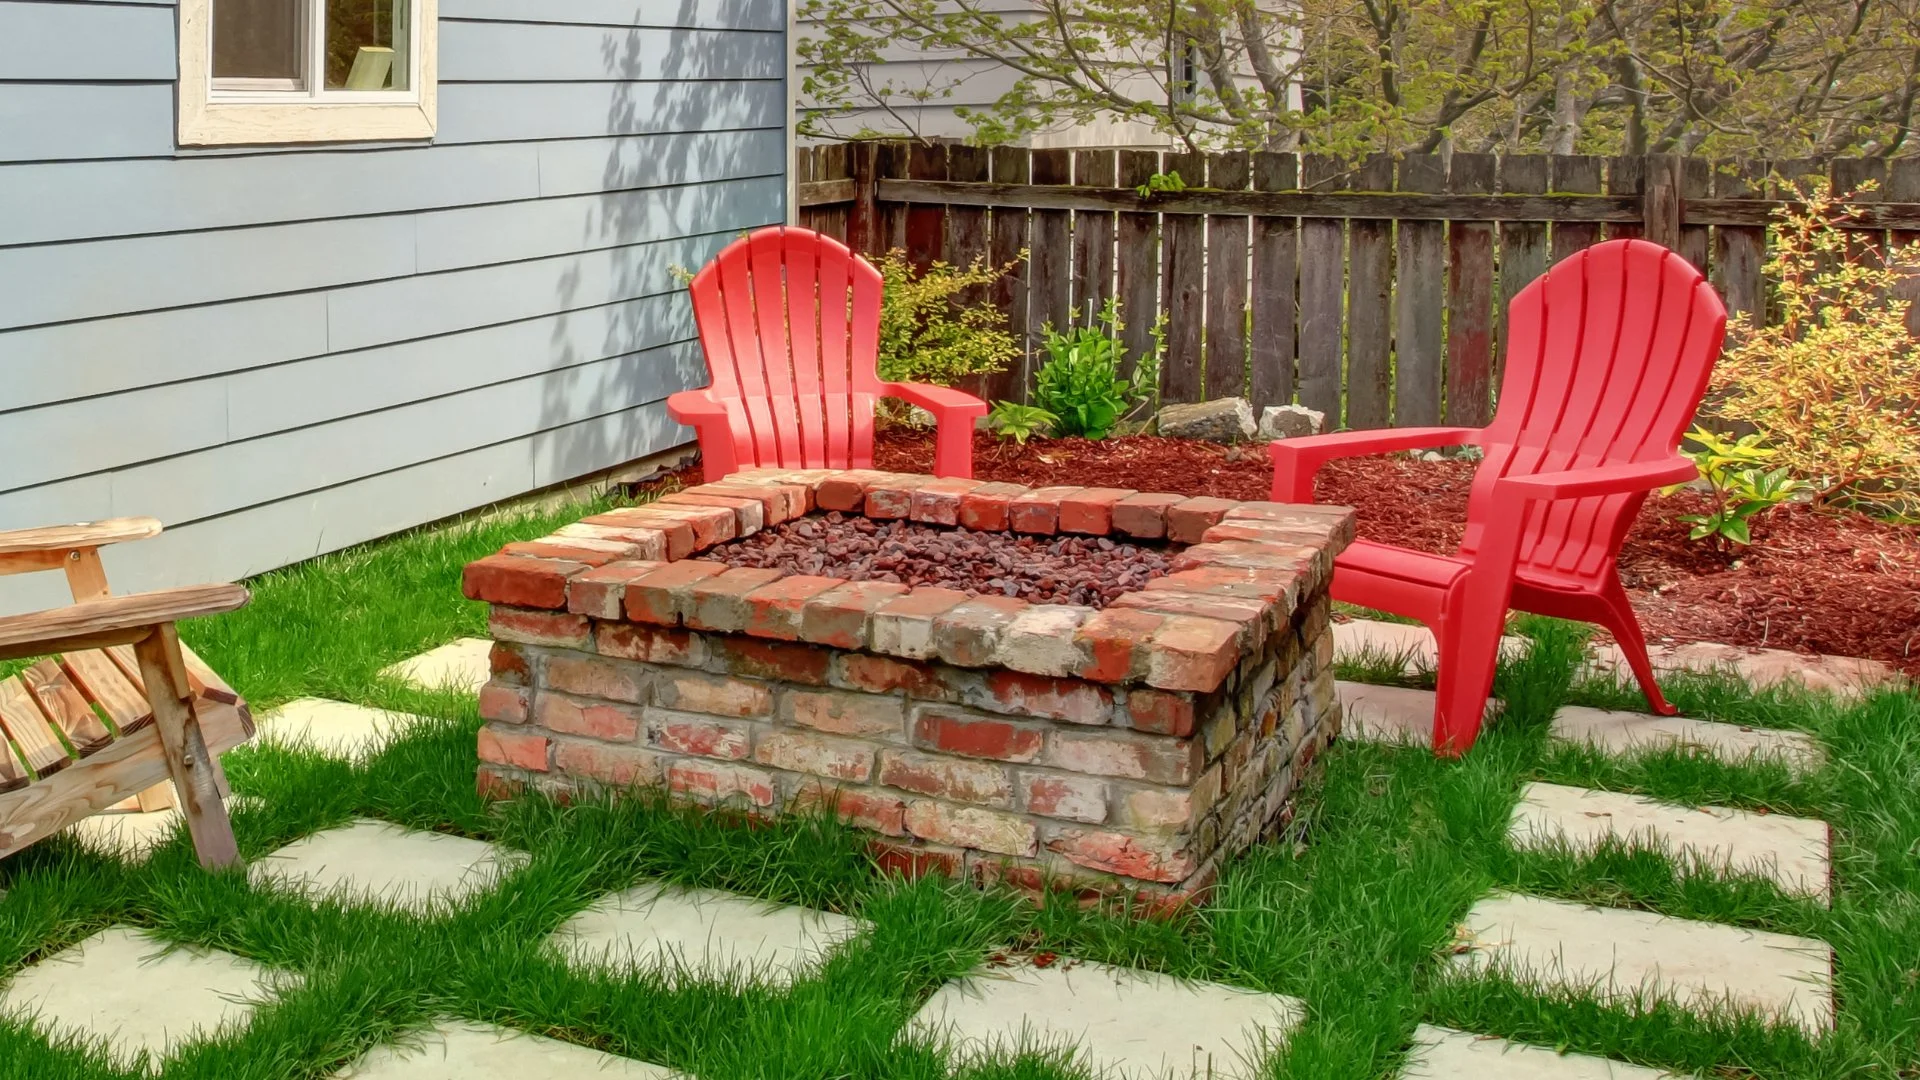 Fire Pits vs Outdoor Fireplaces - Which Fire Feature Is Right for You?